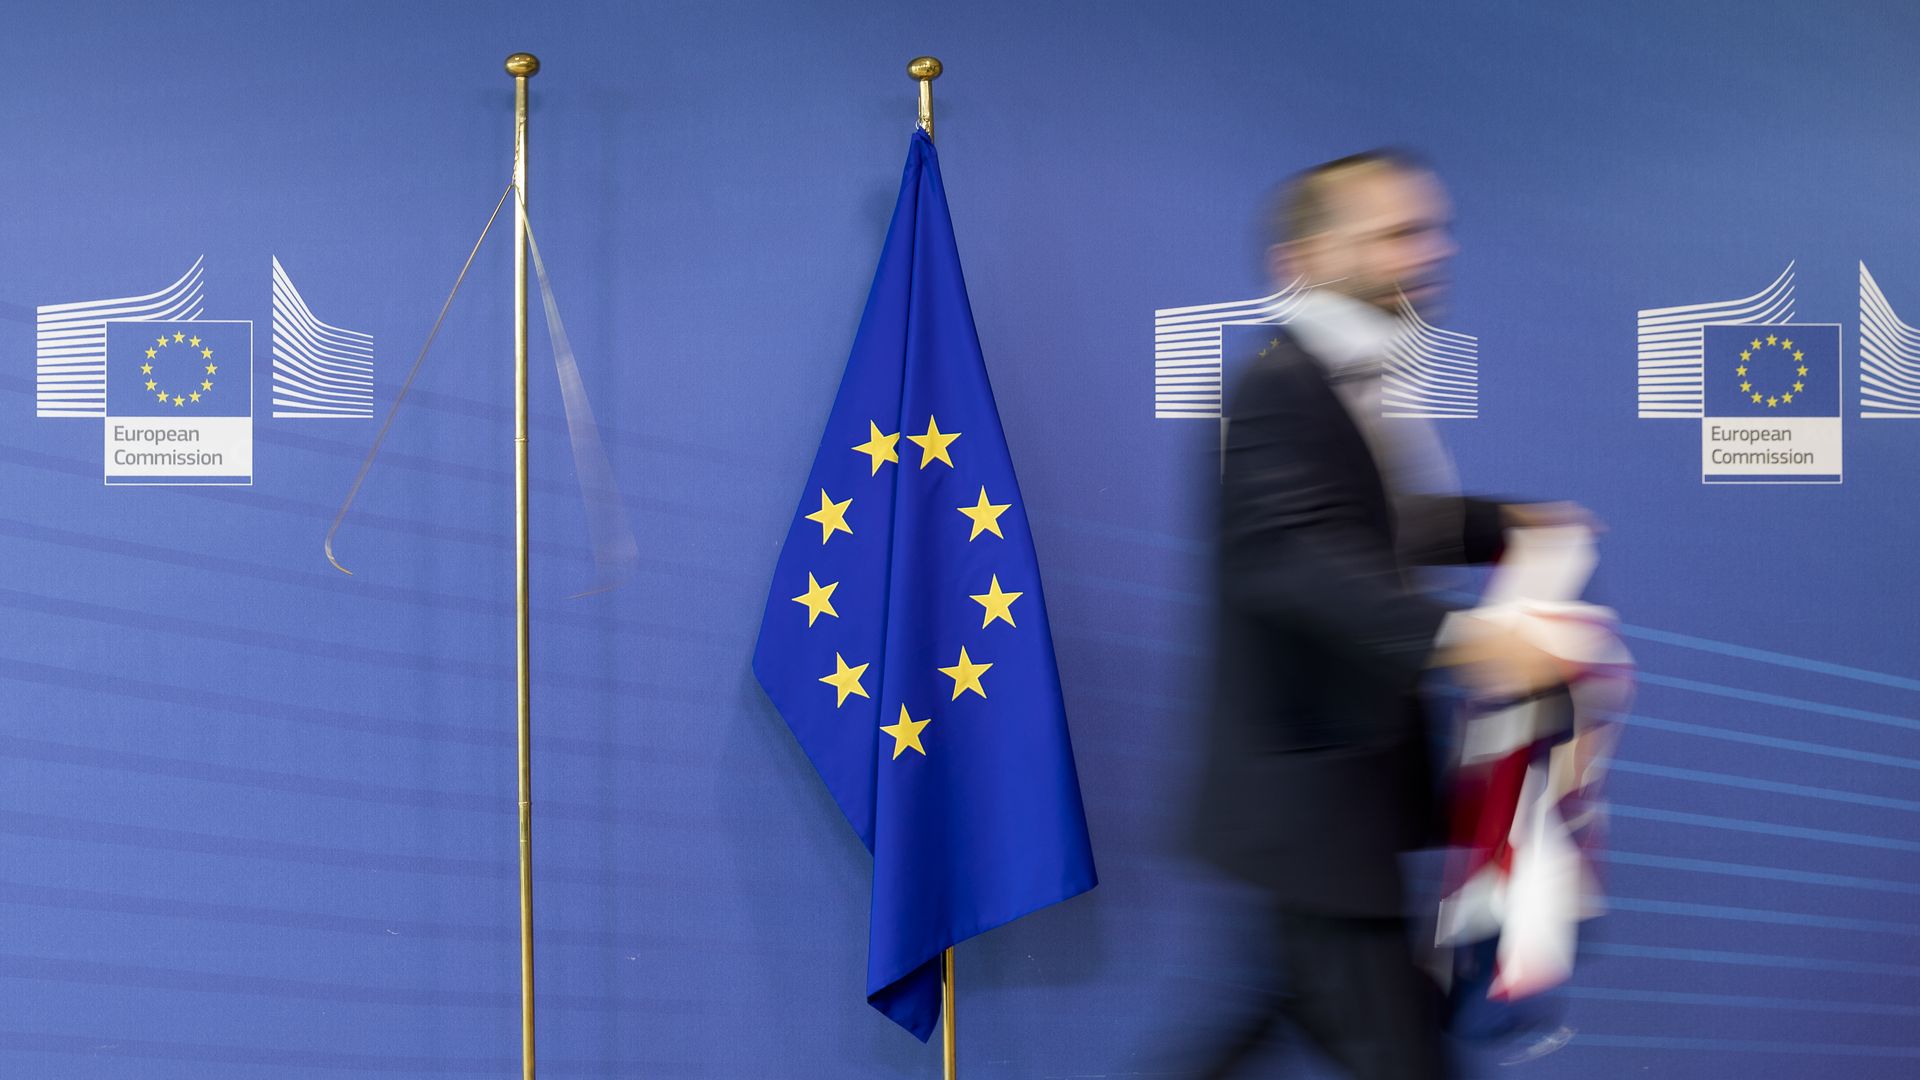 The flag of the European Union with a man walking away from it holding the Union Jack